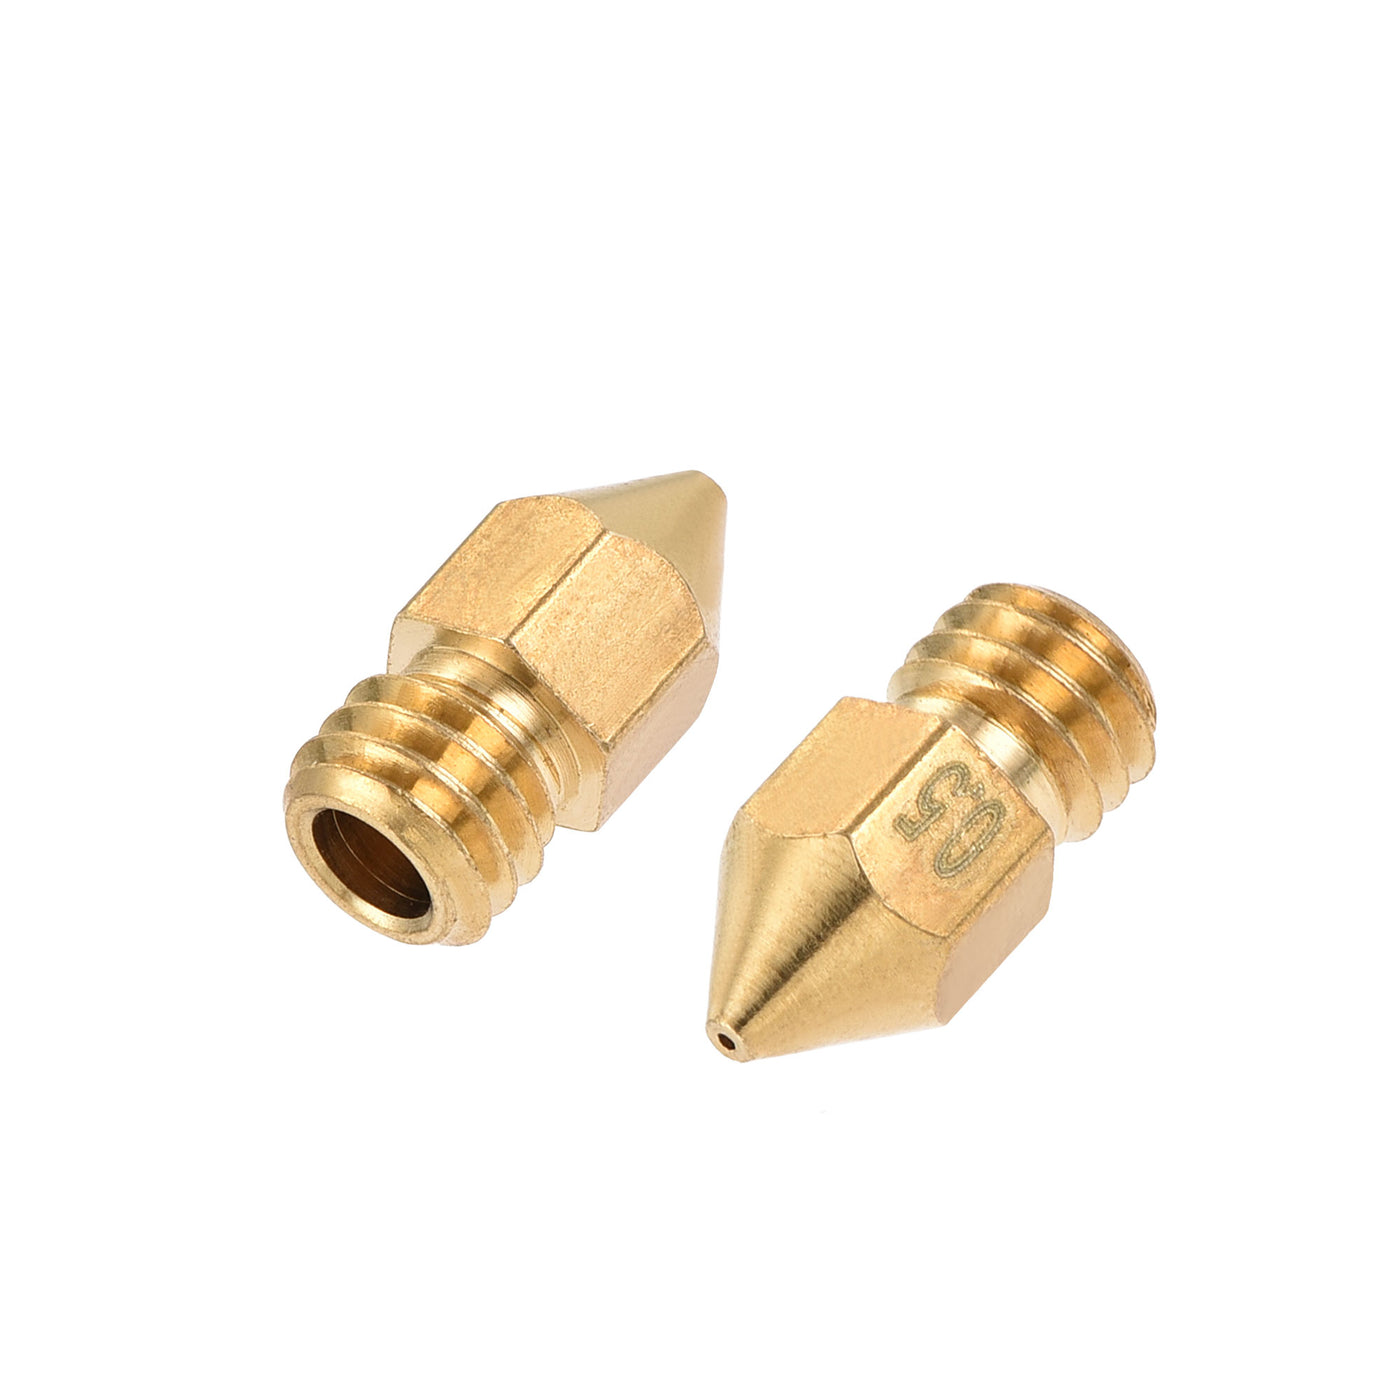 uxcell Uxcell 0.5mm 3D Printer Nozzle, 18pcs M6 Thread for MK8 3mm Extruder Print, Brass